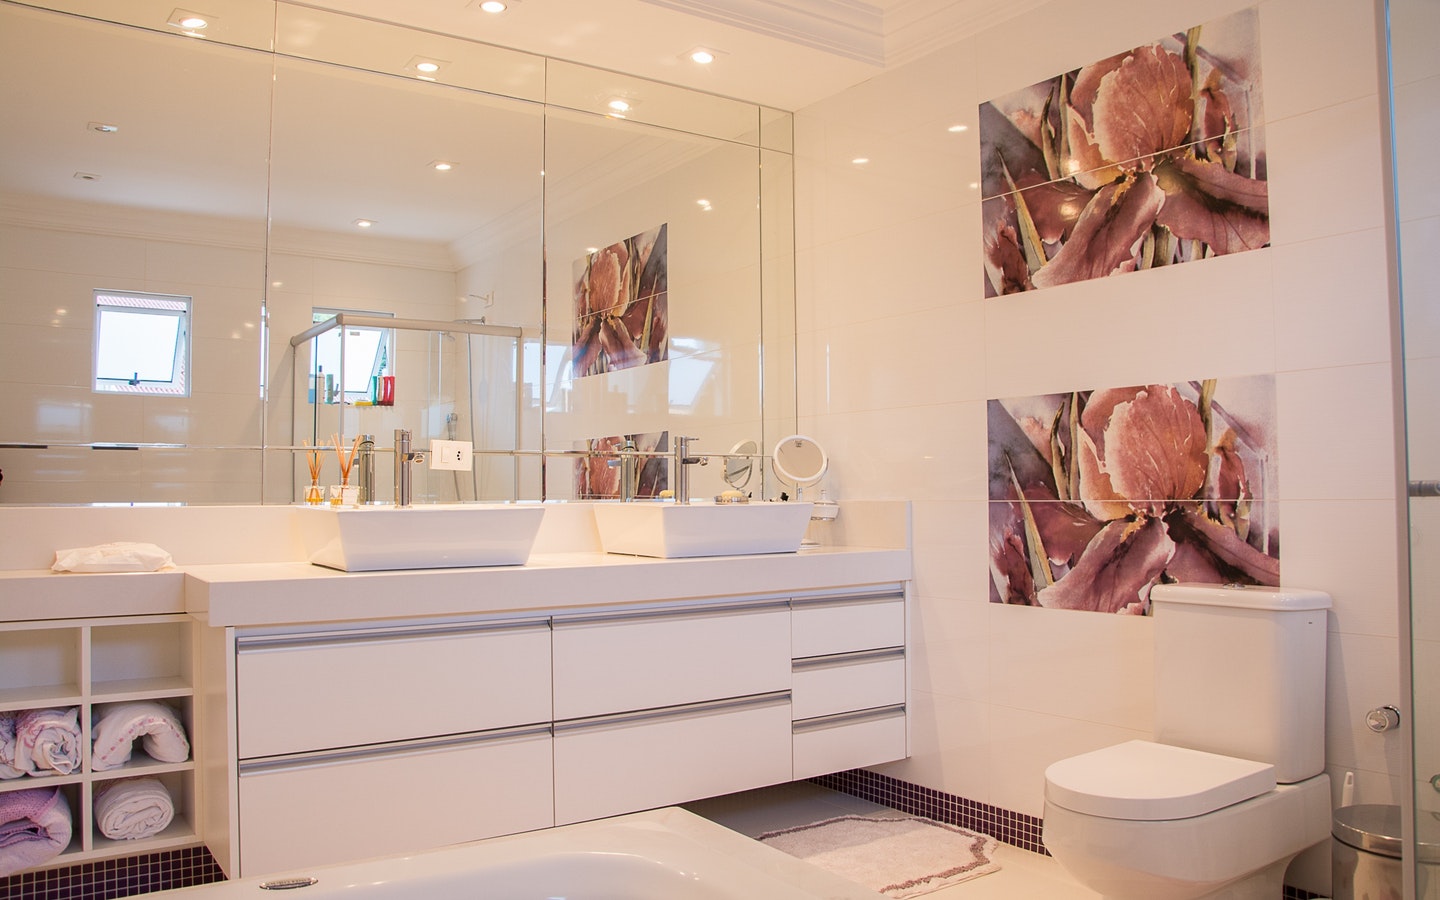 as a buyer, you will look for the details in the bathroom